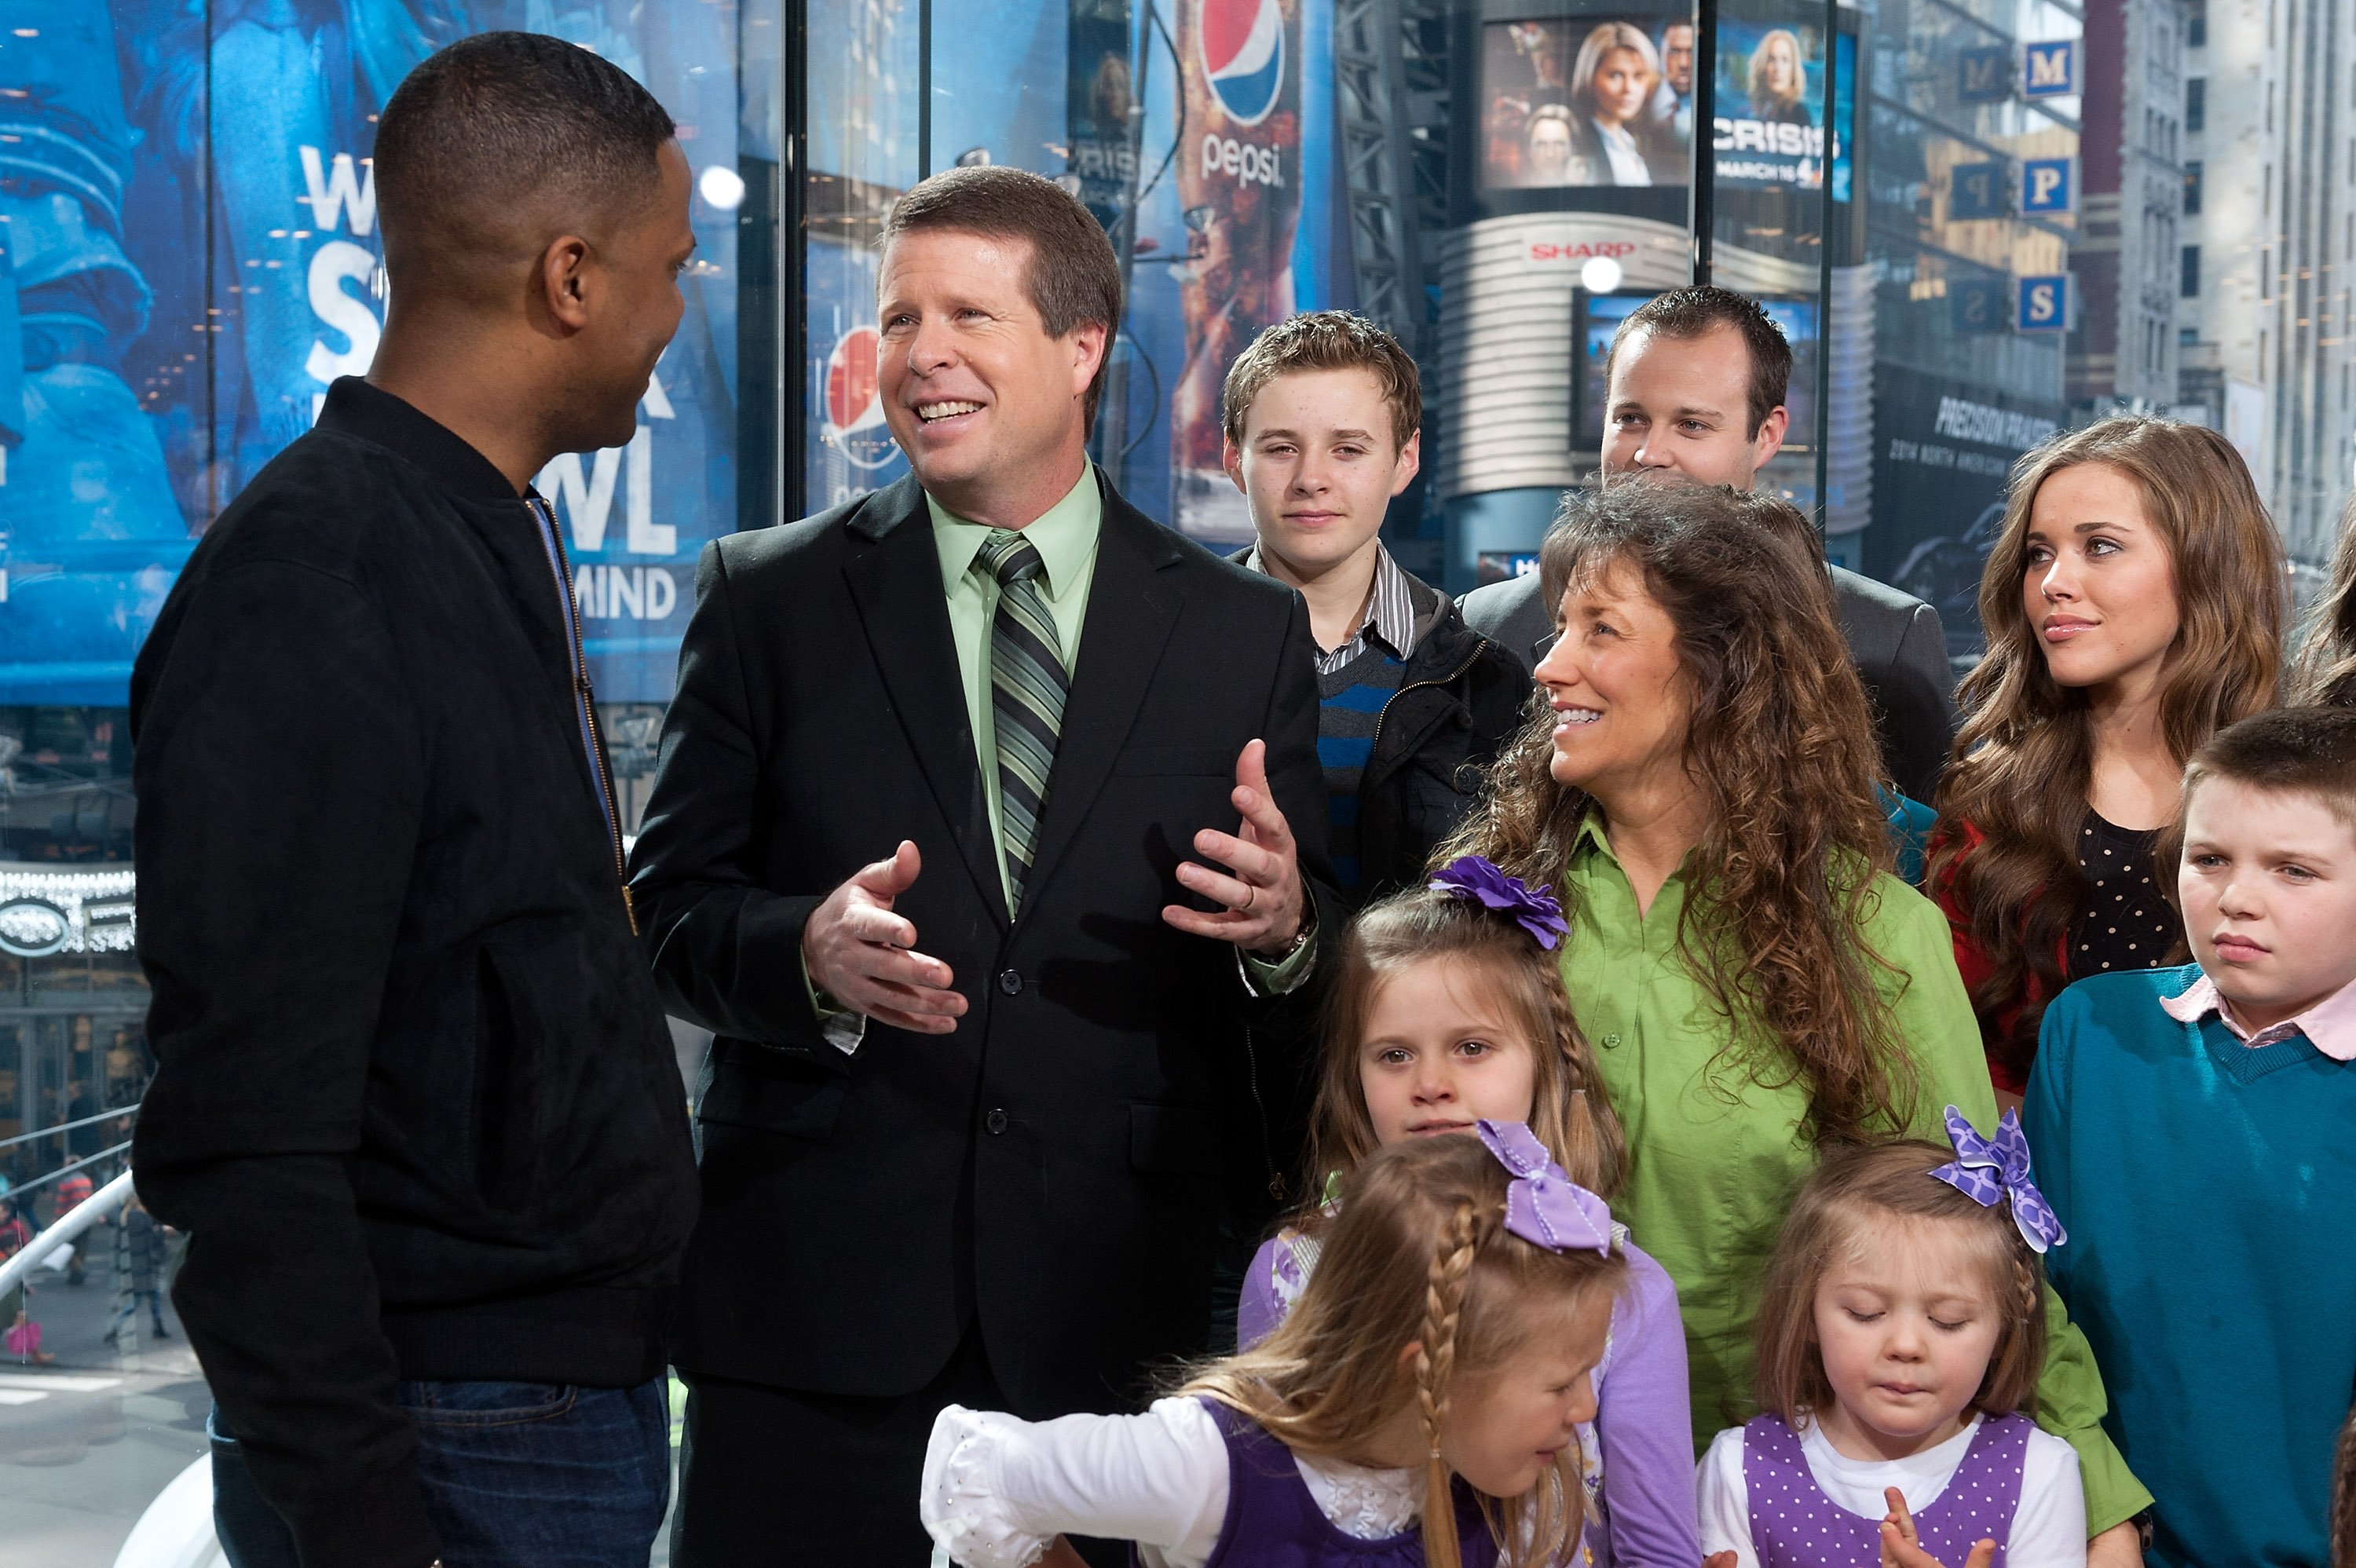 Jim Bob and Michelle Duggar with their kids. | Source: Getty Images